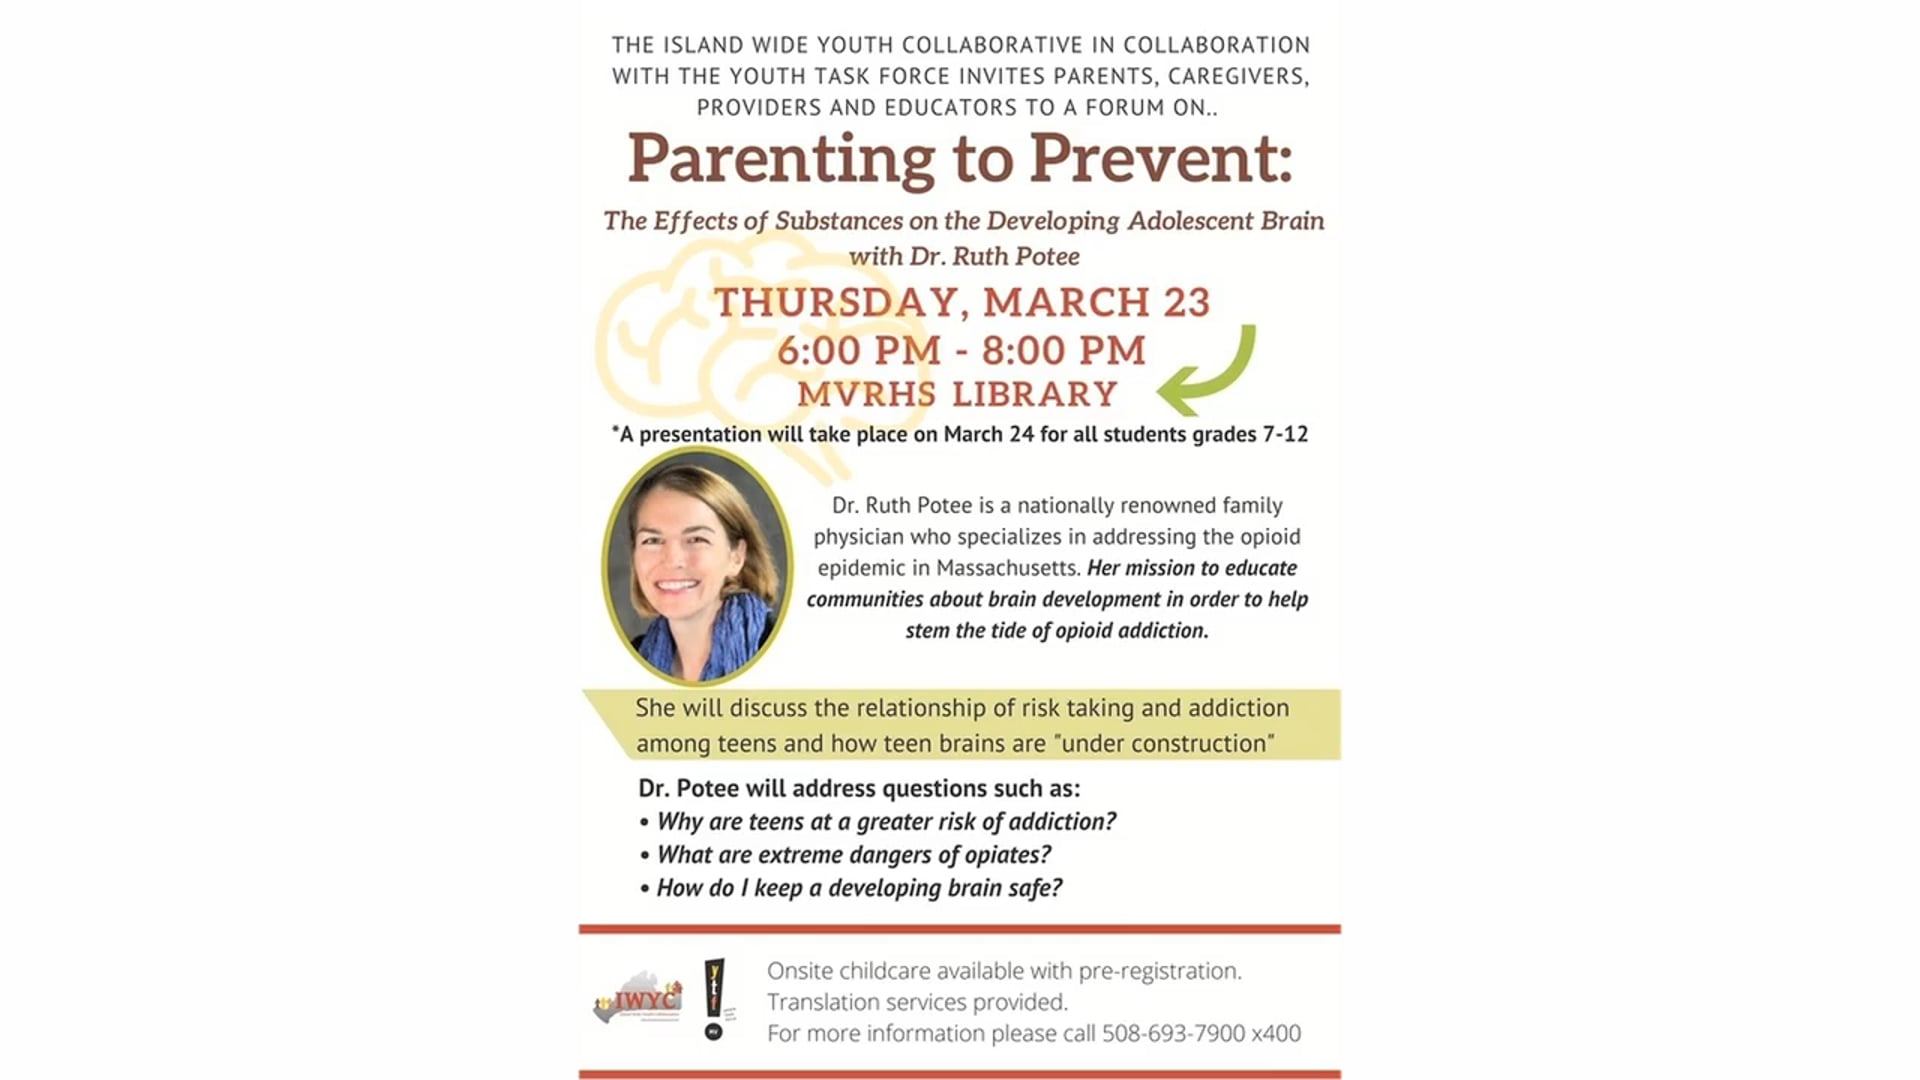 Ruth Potee - Parenting to Prevent: The Effects of Substances on the Developing Adolescent Brain